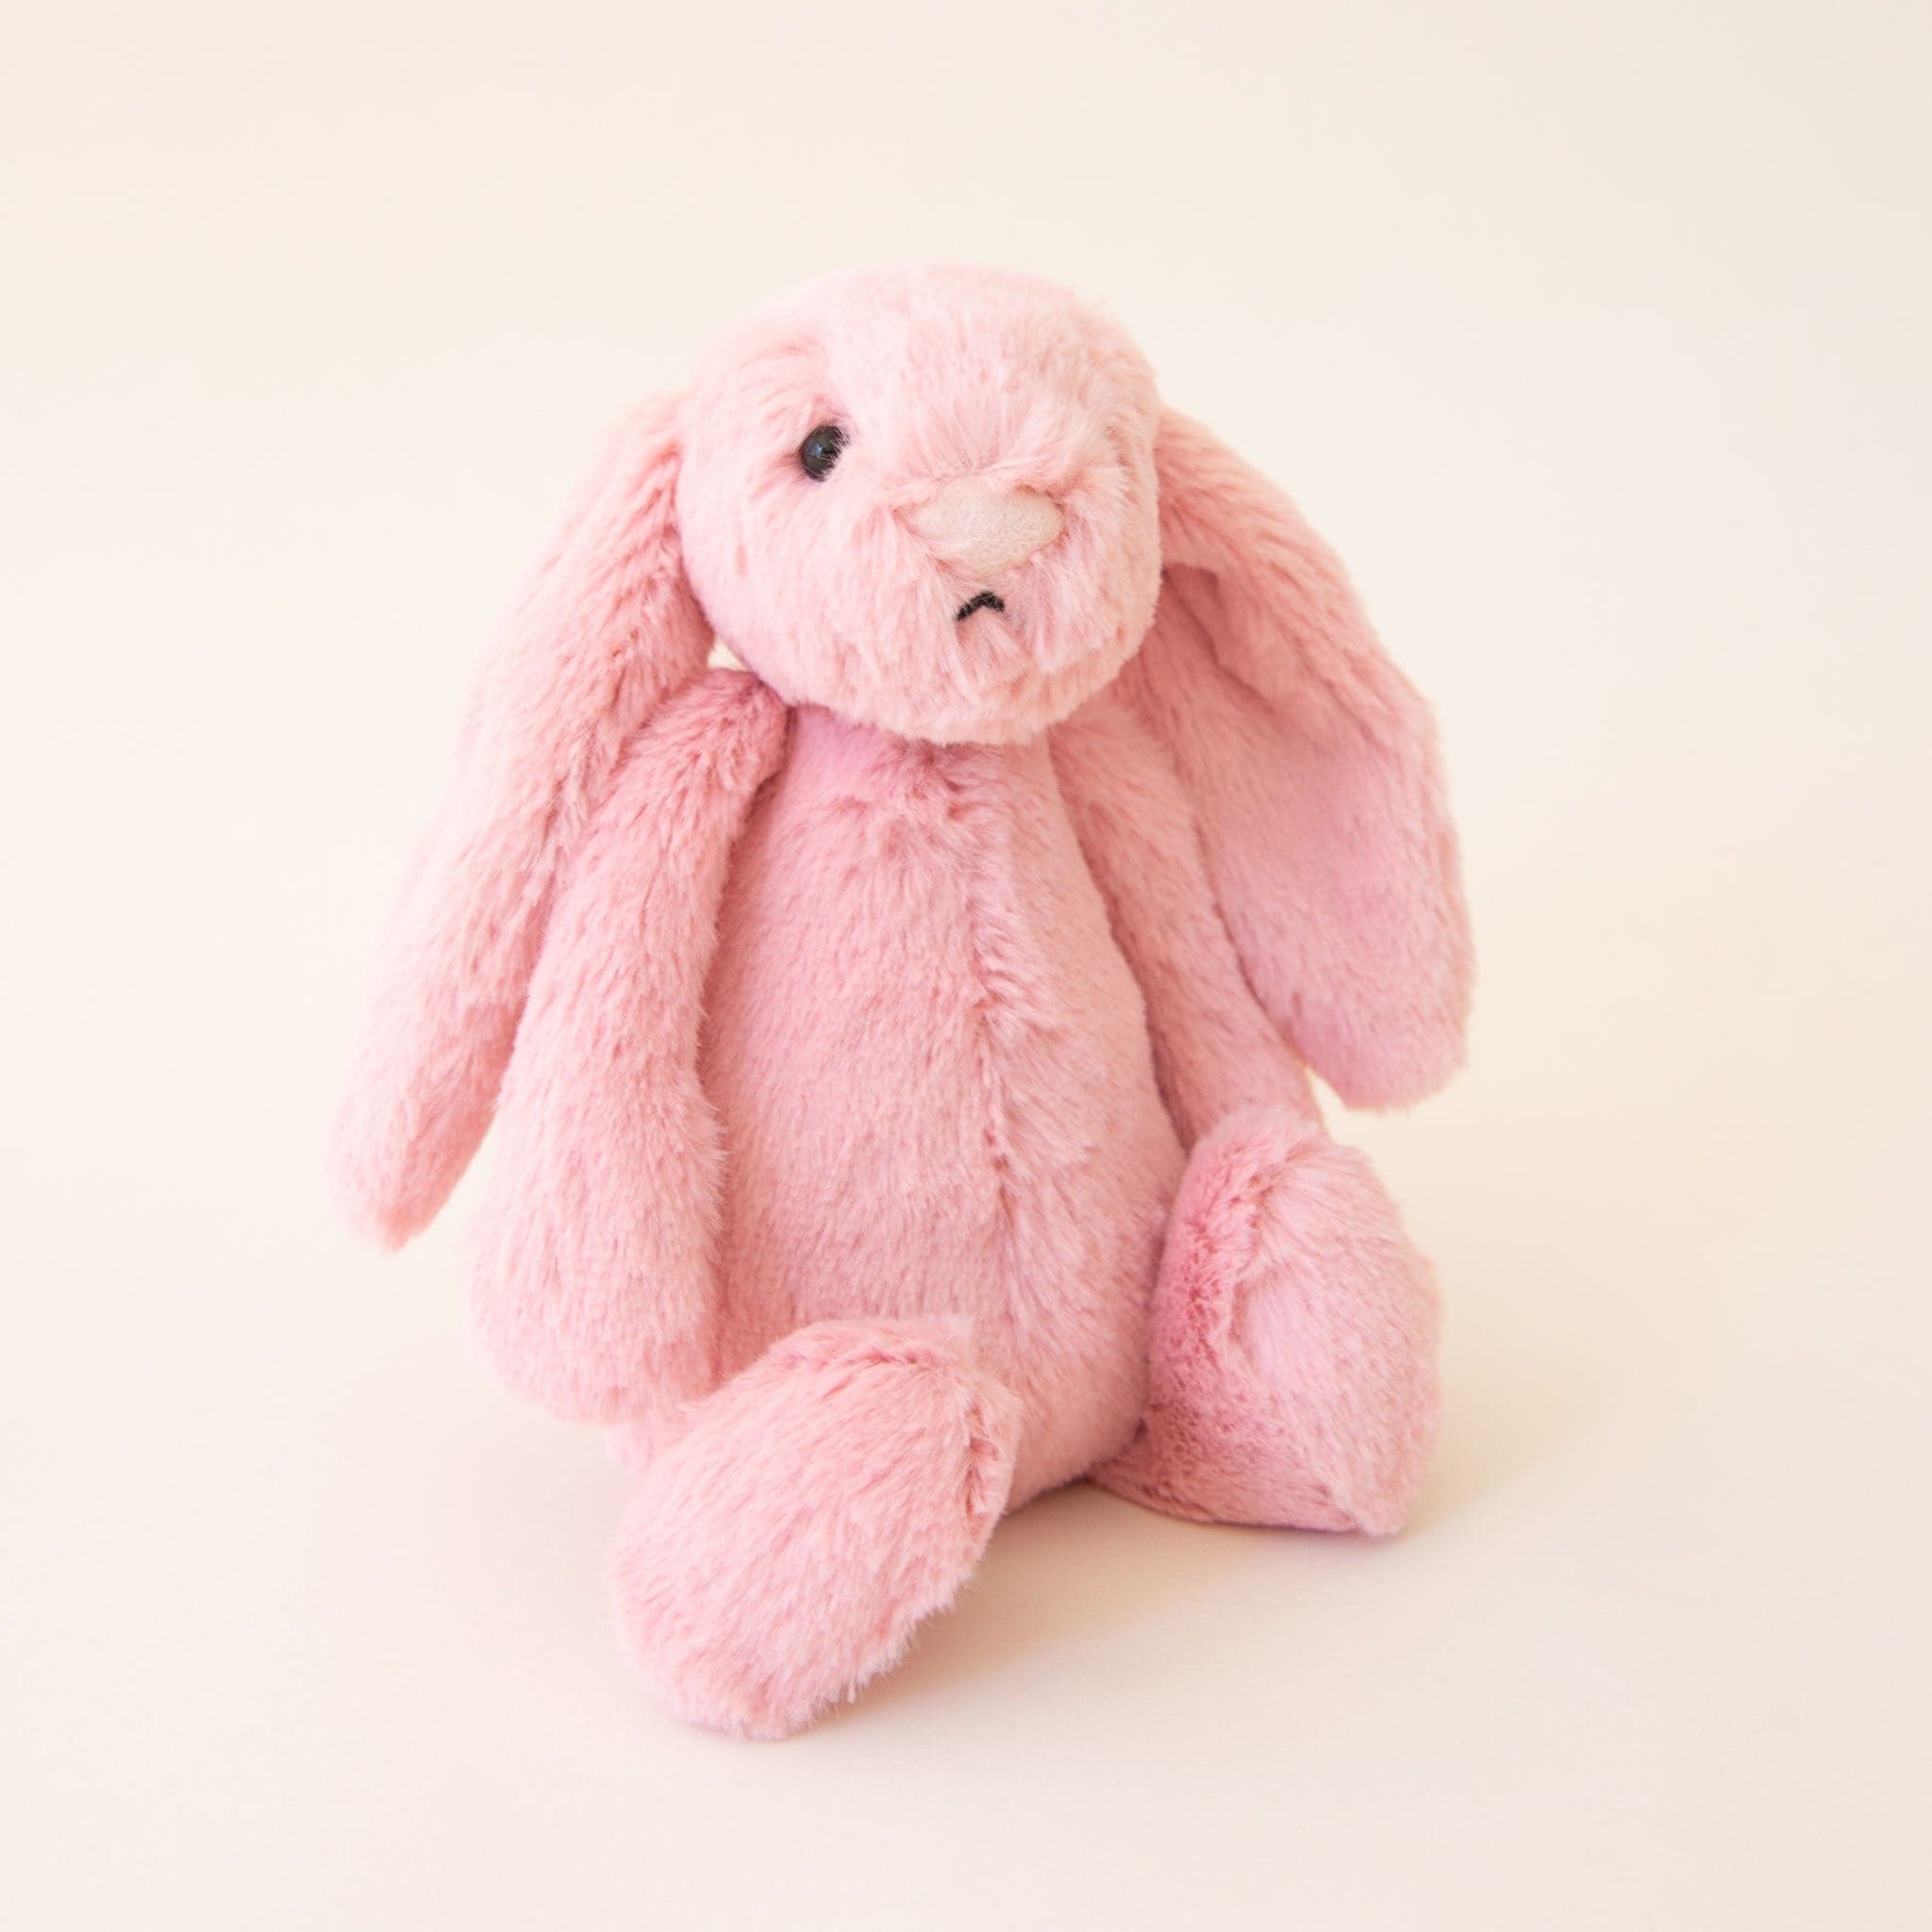 The smaller version of the fuzzy pink bunny with the same exact look, with long floppy ears but in a smaller size.